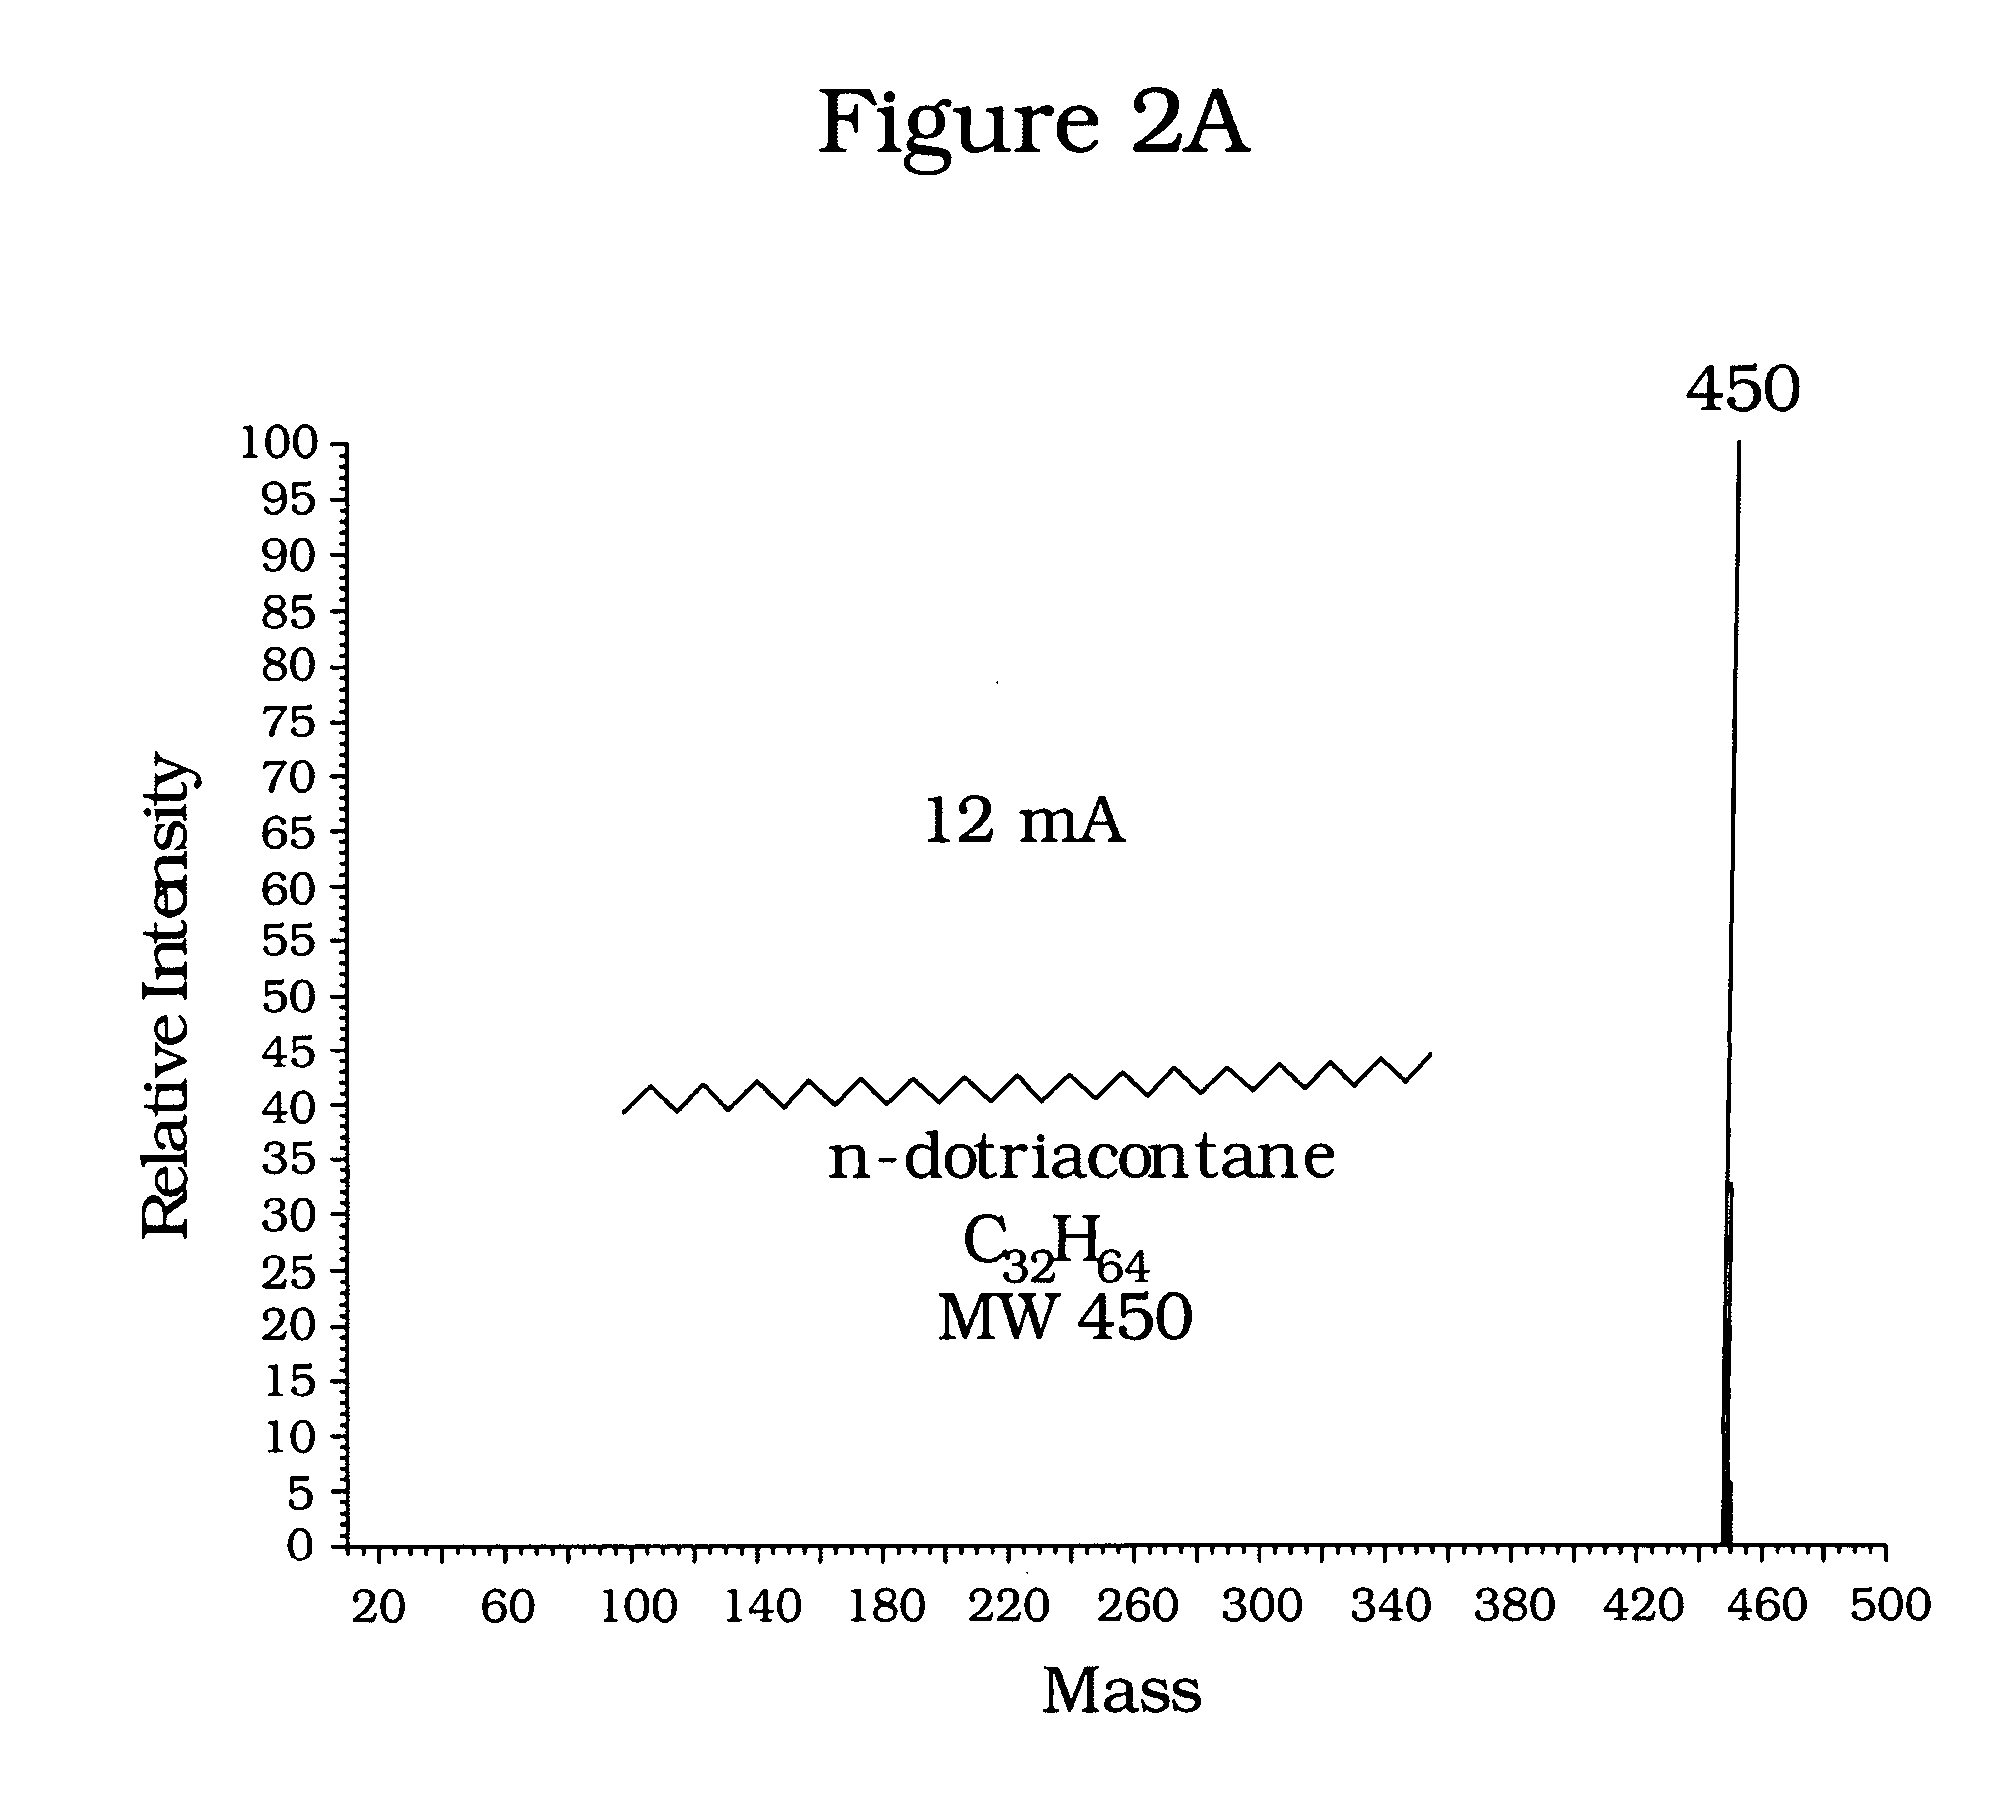 Method of producing molecular profiles of isoparaffins by low emitter current field ionization mass spectrometry